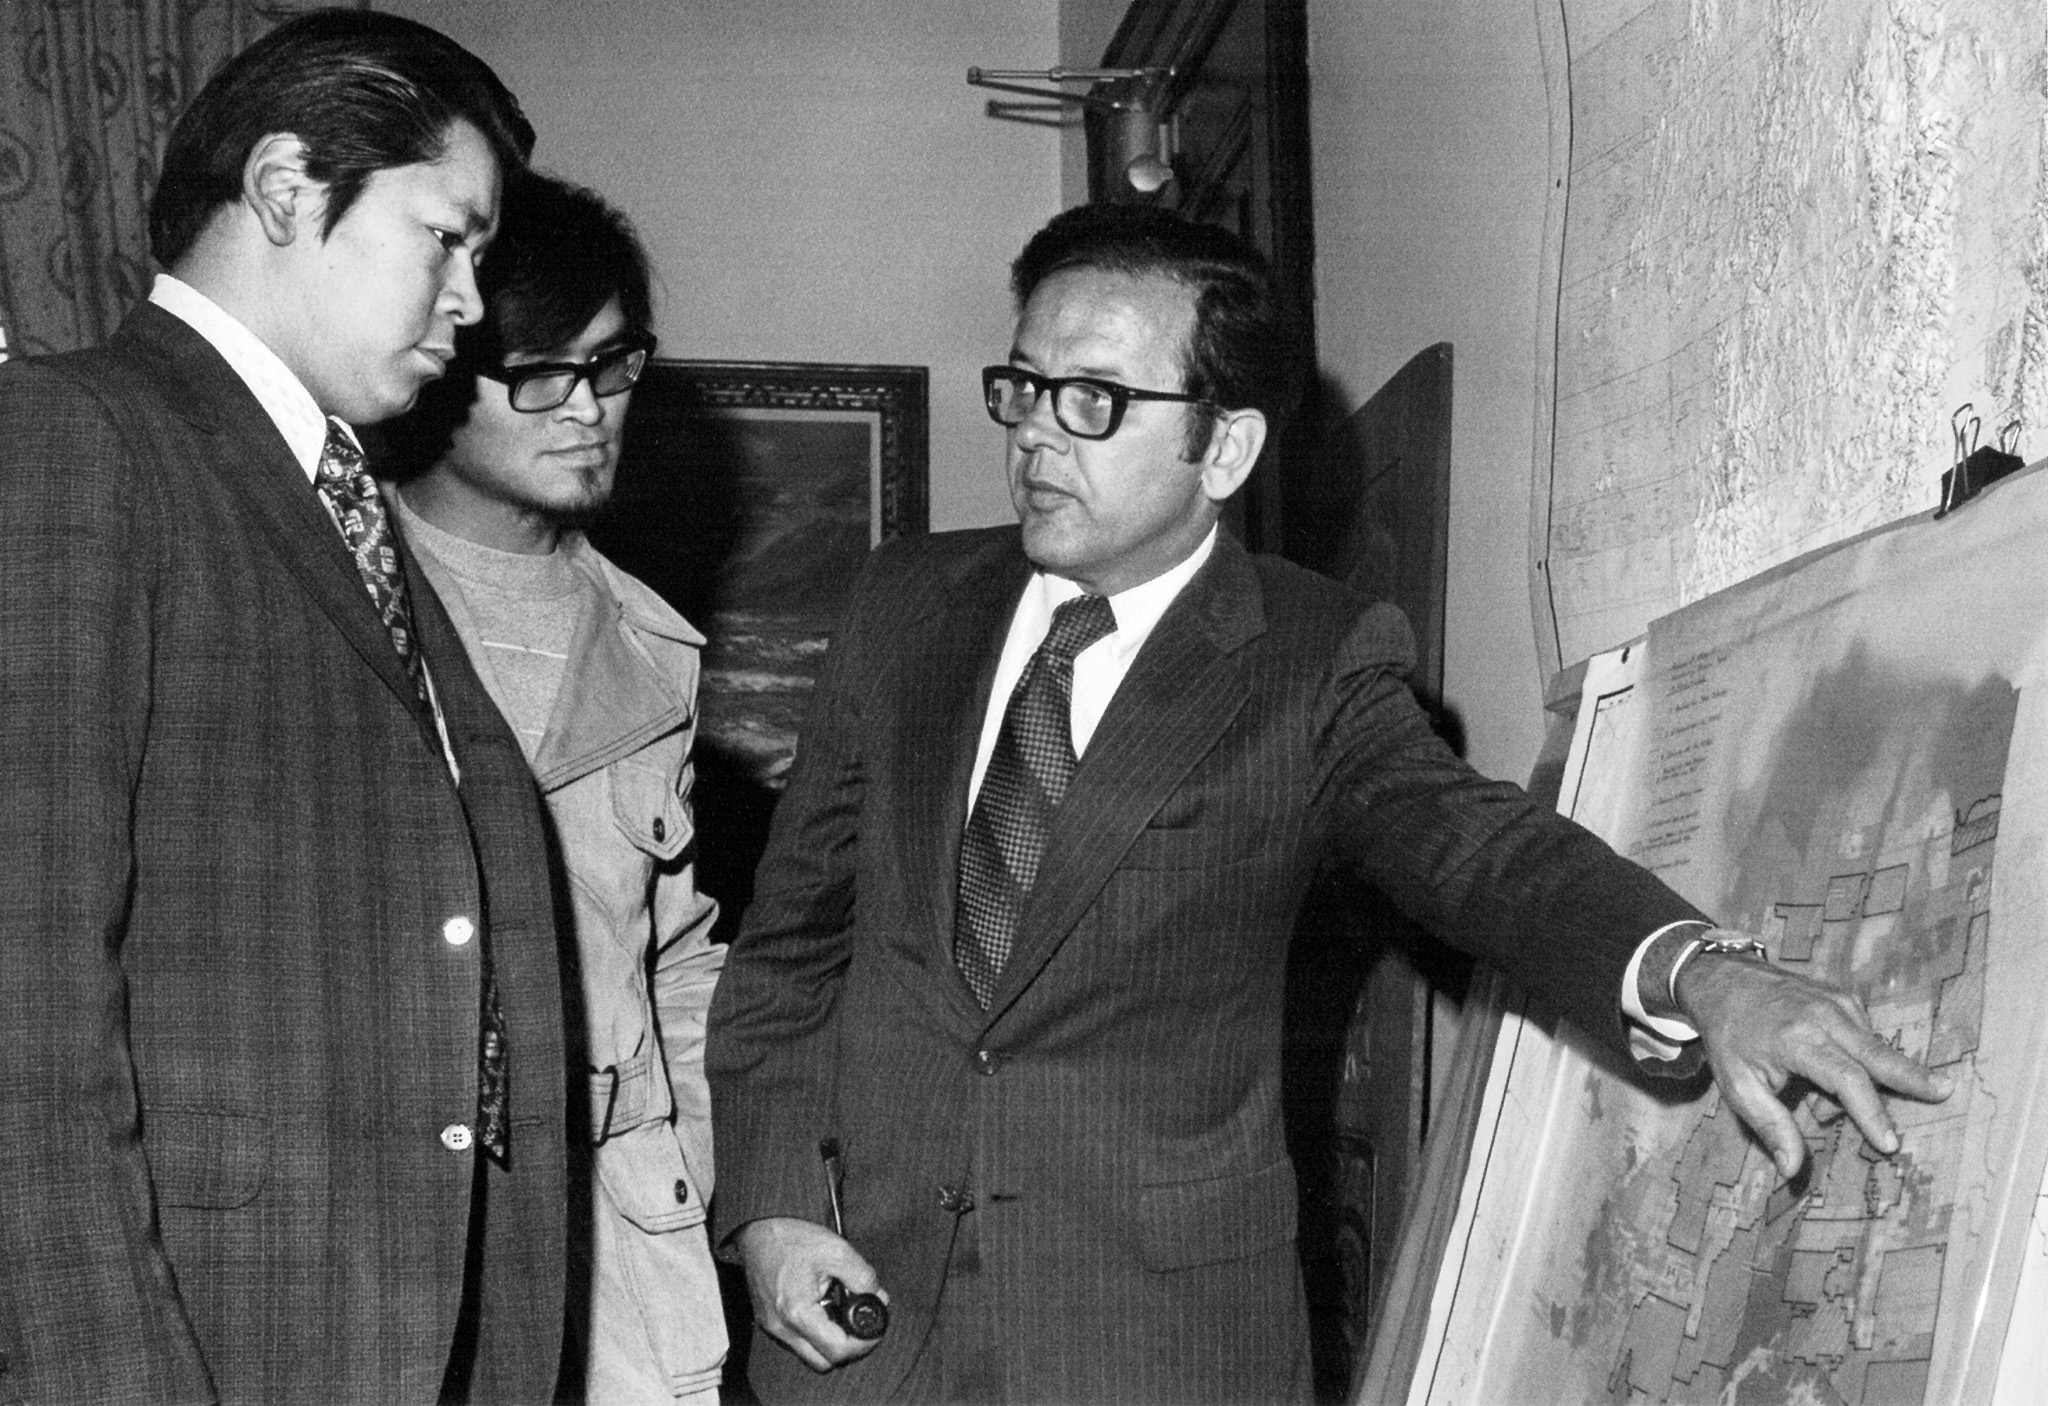 A black and white photo of a man pointing to a map.